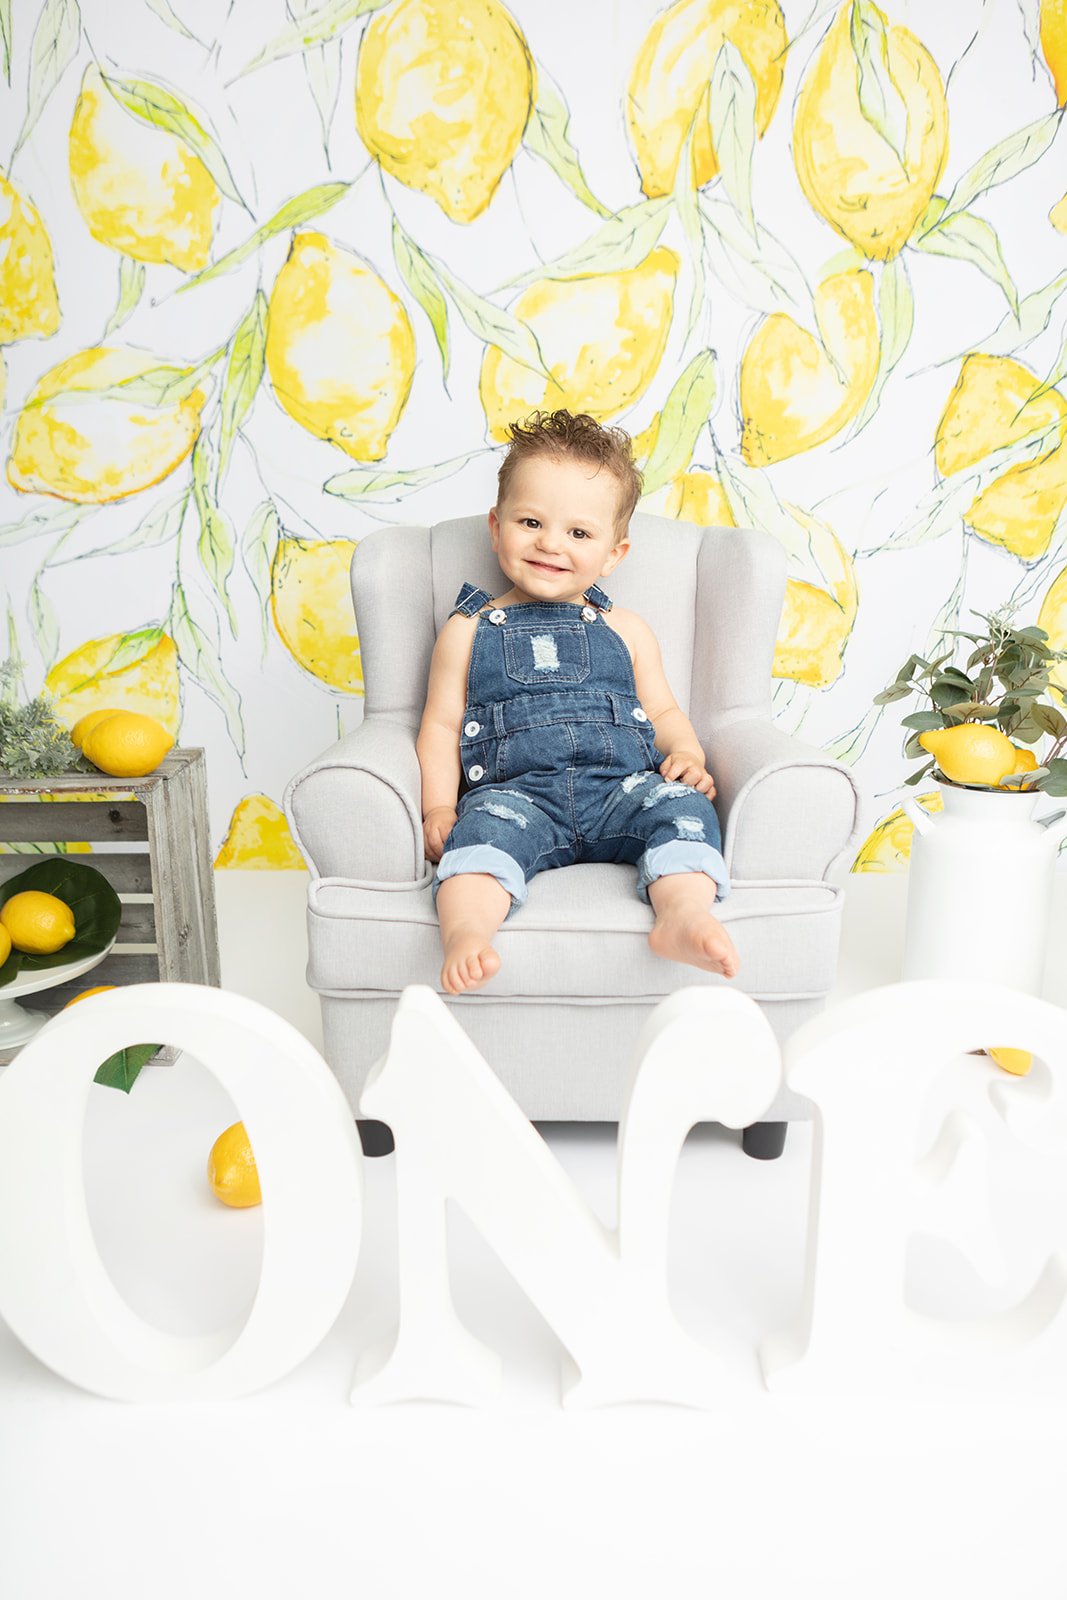 A smiling little boy in denim overalls sits in a light gray easy chair. In the foreground of the image are oversized, styled letters spelling out the number "one". A lemon backdrop by Heidi Hope and farm style lemon accessories add visual interest to the photo.